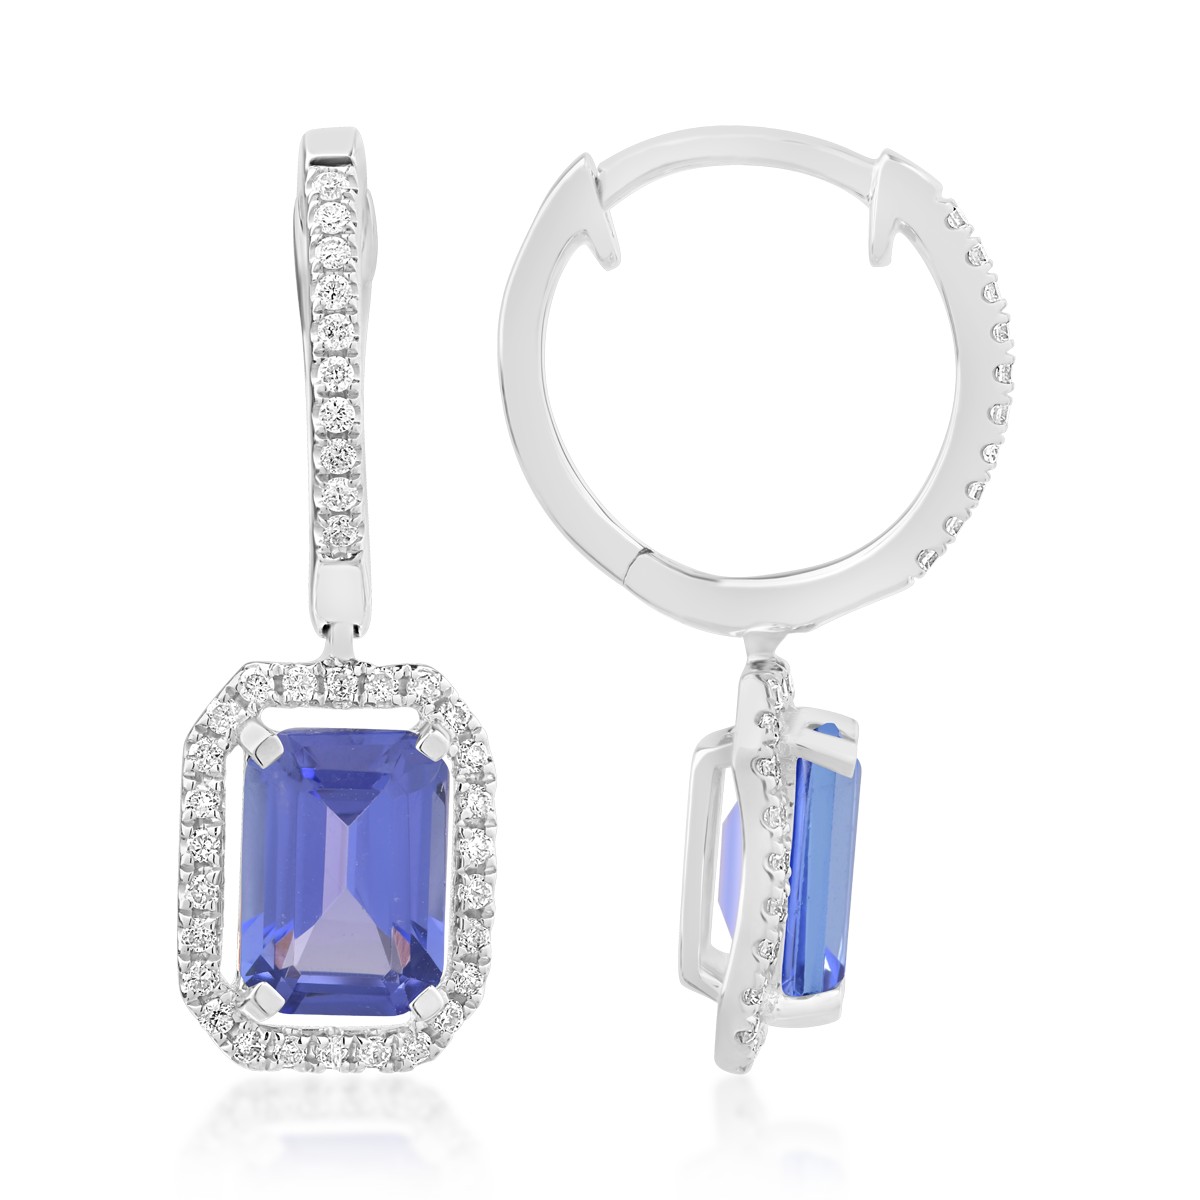 18K white gold earrings with 2.23ct tanzanite and 0.23ct diamonds